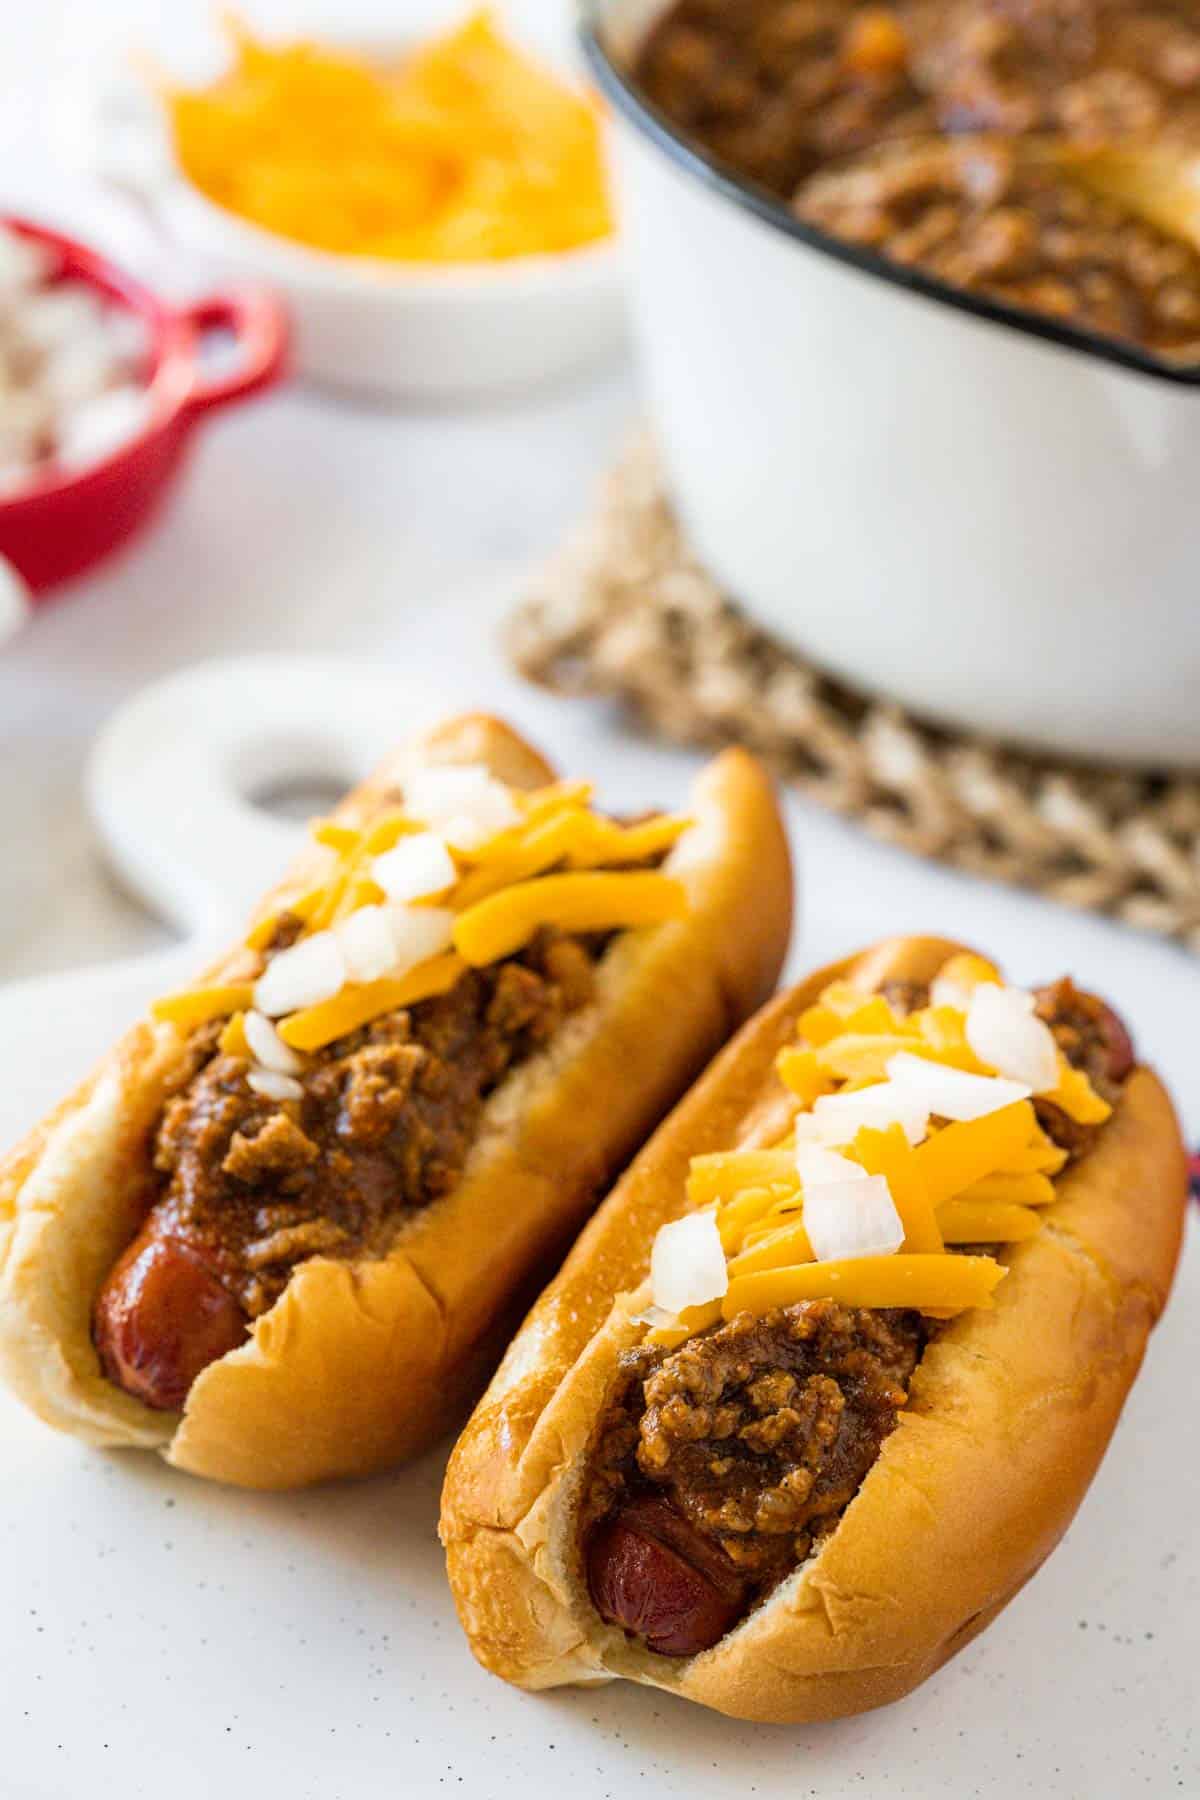 Two air fryer hot dogs topped with hot dog chili sauce, cheese, and diced onion.